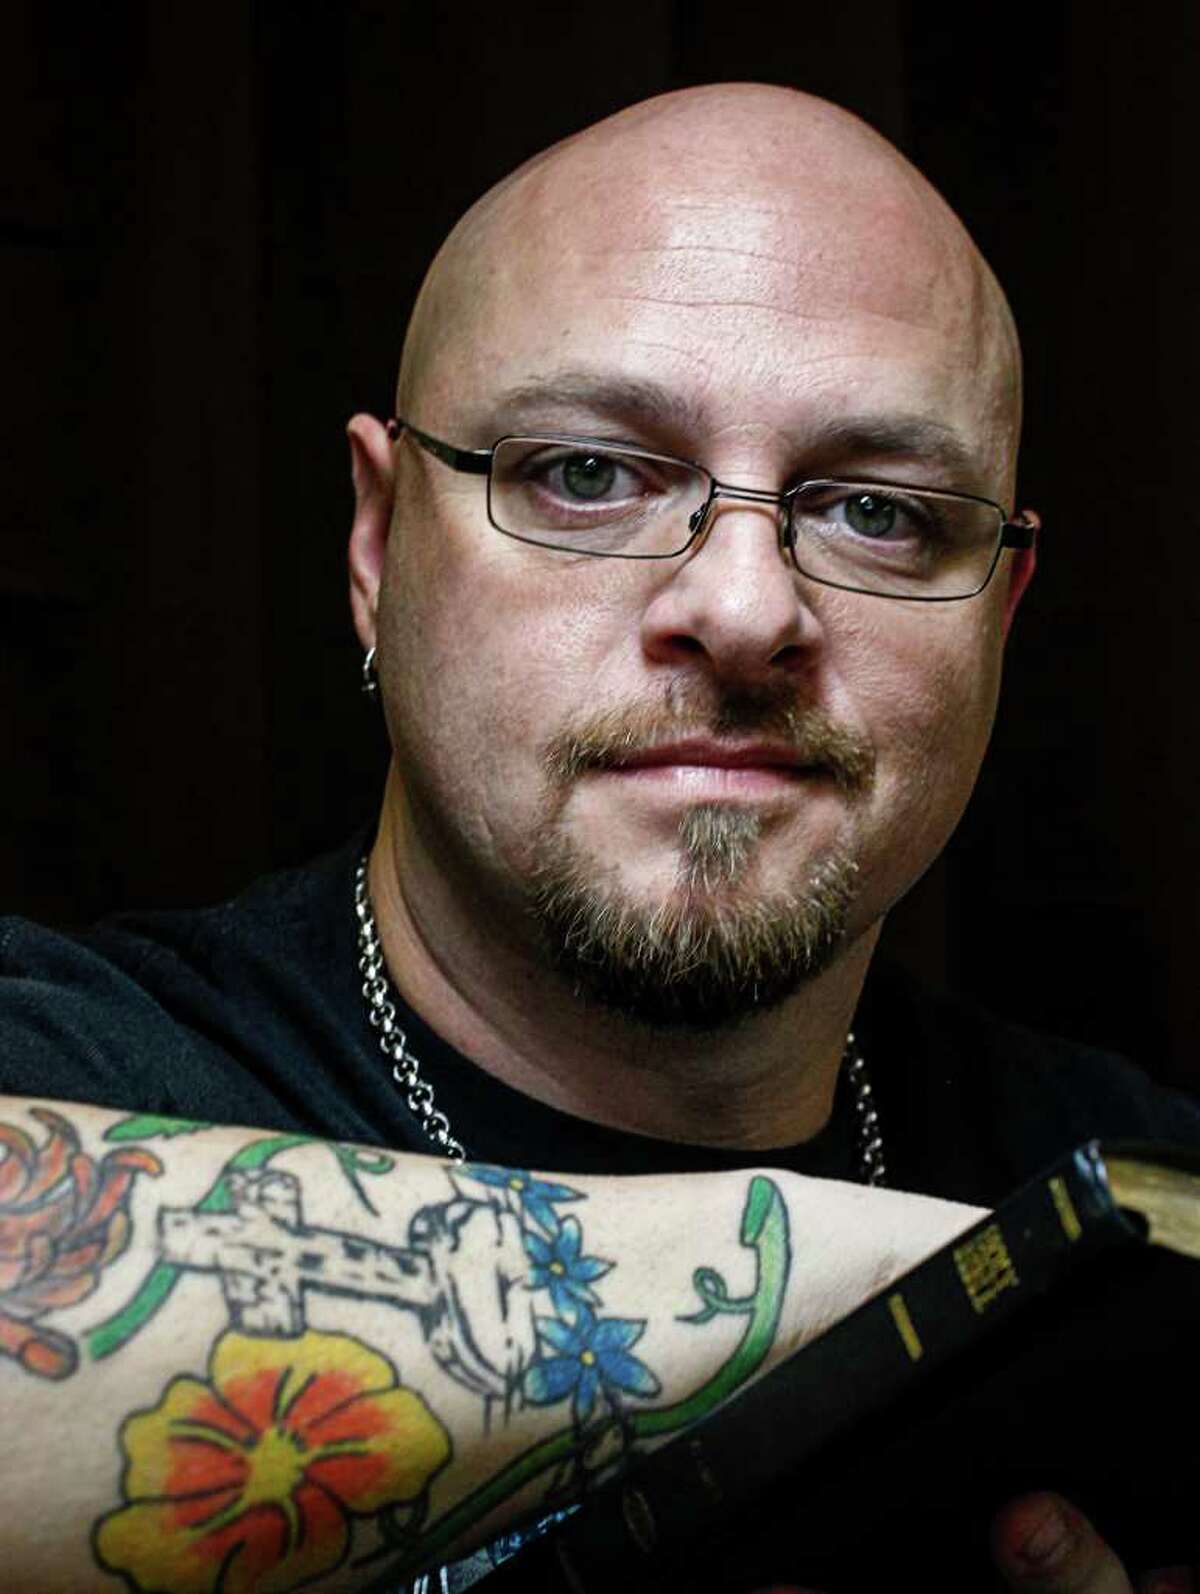 Tattoo artist finds his ministry in ink